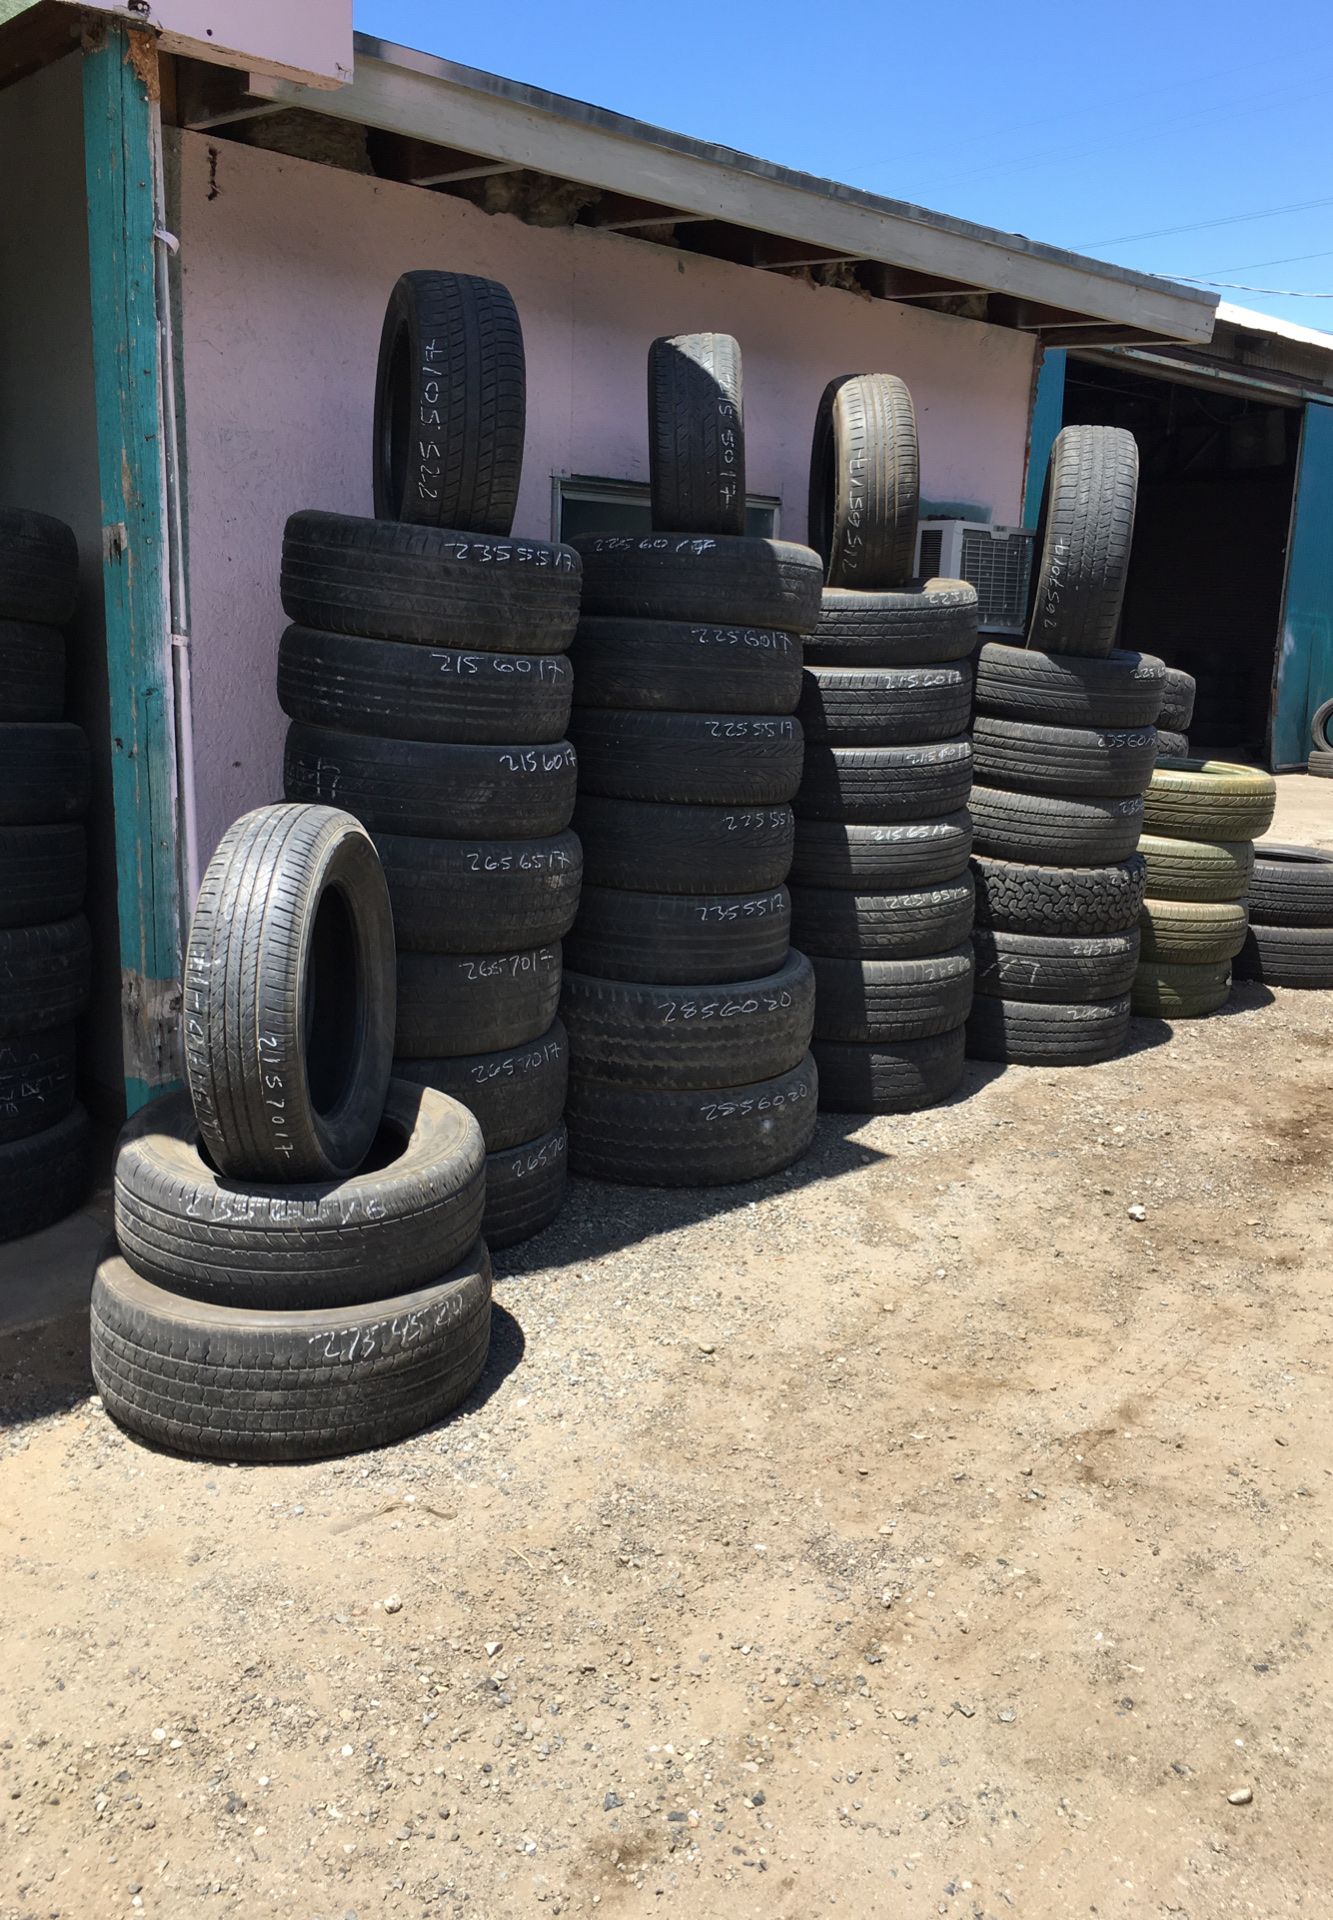 Used tires $15 in a good condition check in water before putting back on vehicle